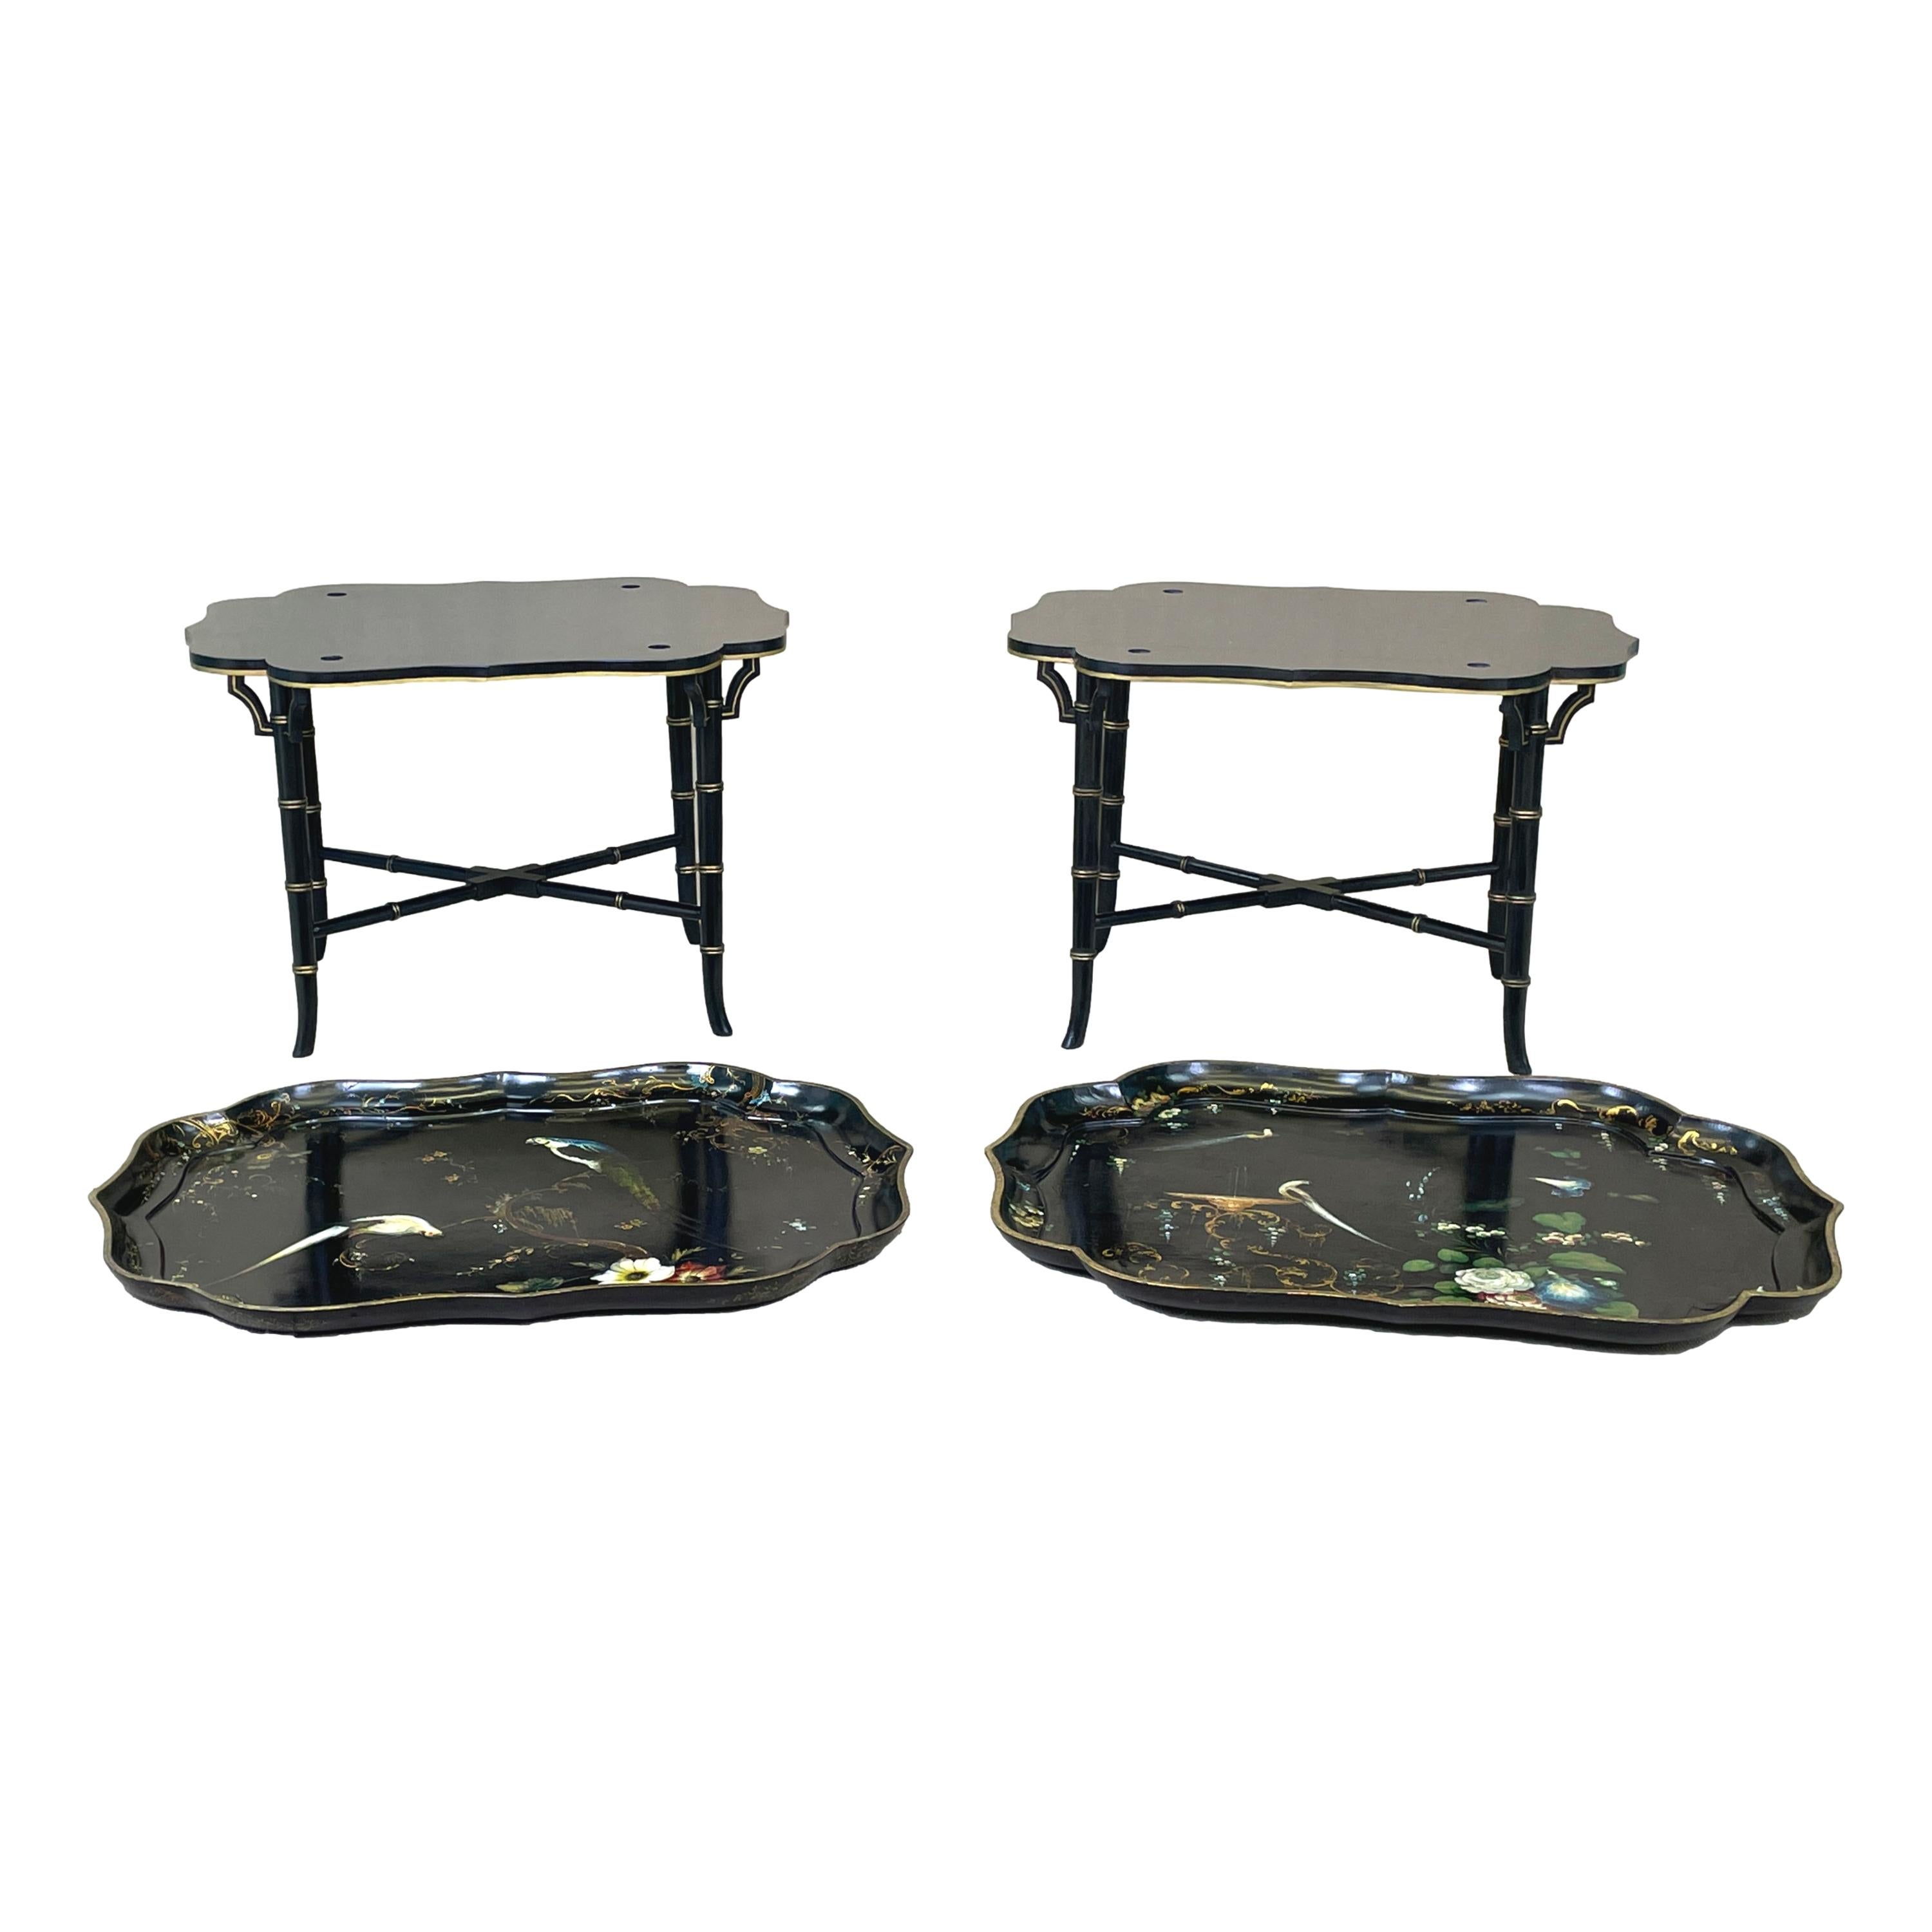 A delightful and rarely found matched pair of mid 19th century
papier maché tray on stands having elegant shaped
edges with hand painted and gilded decoration
housed on later bamboo design stands

(It is very rare to find a pair of these papier